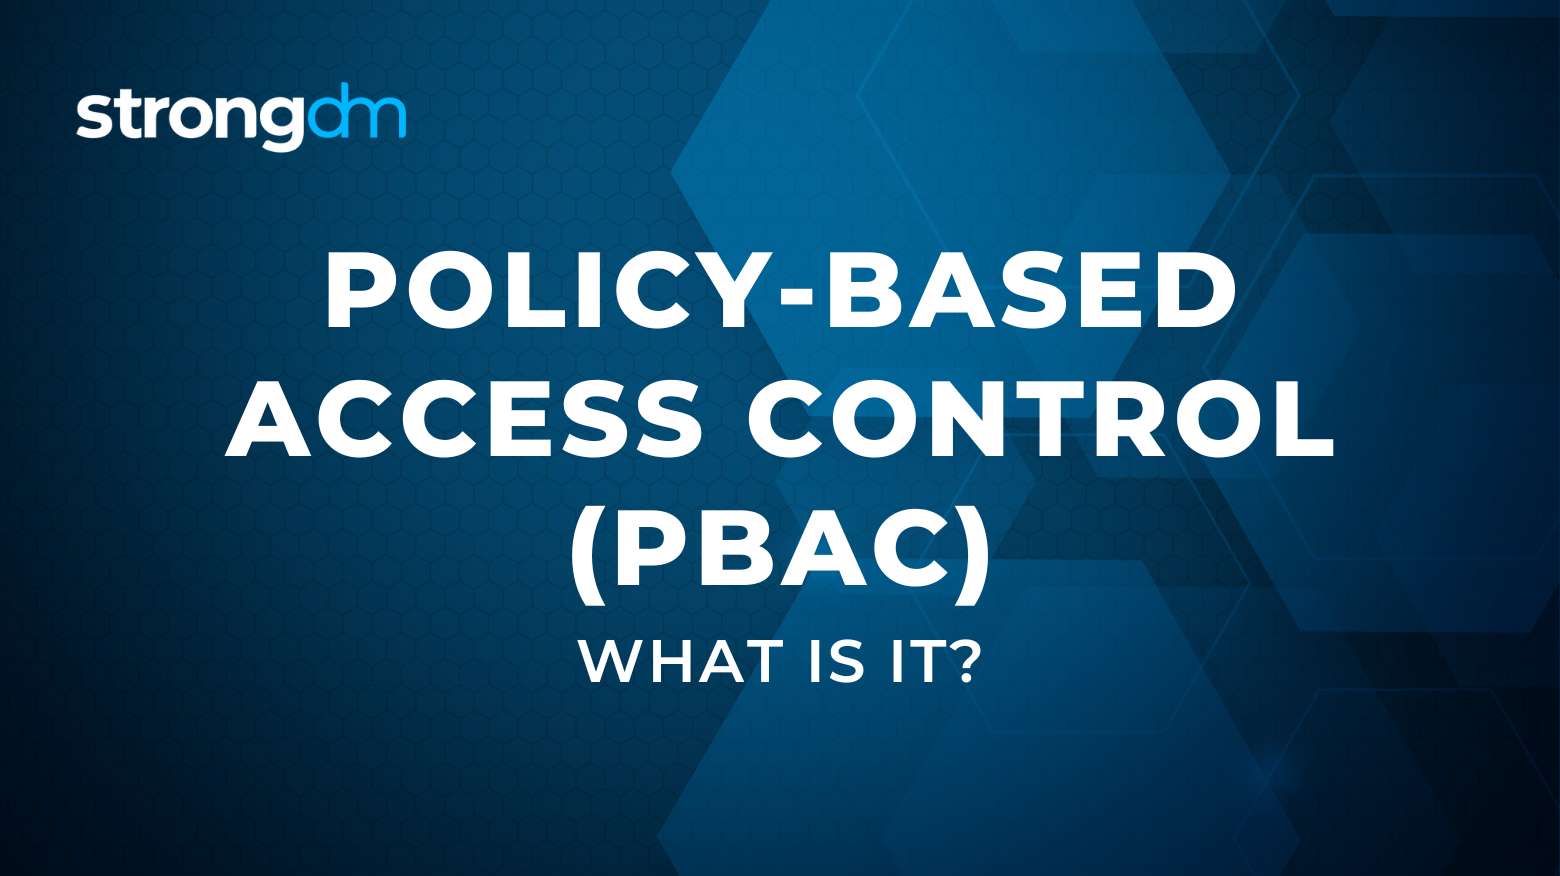 What is Policy-Based Access Control (PBAC)?